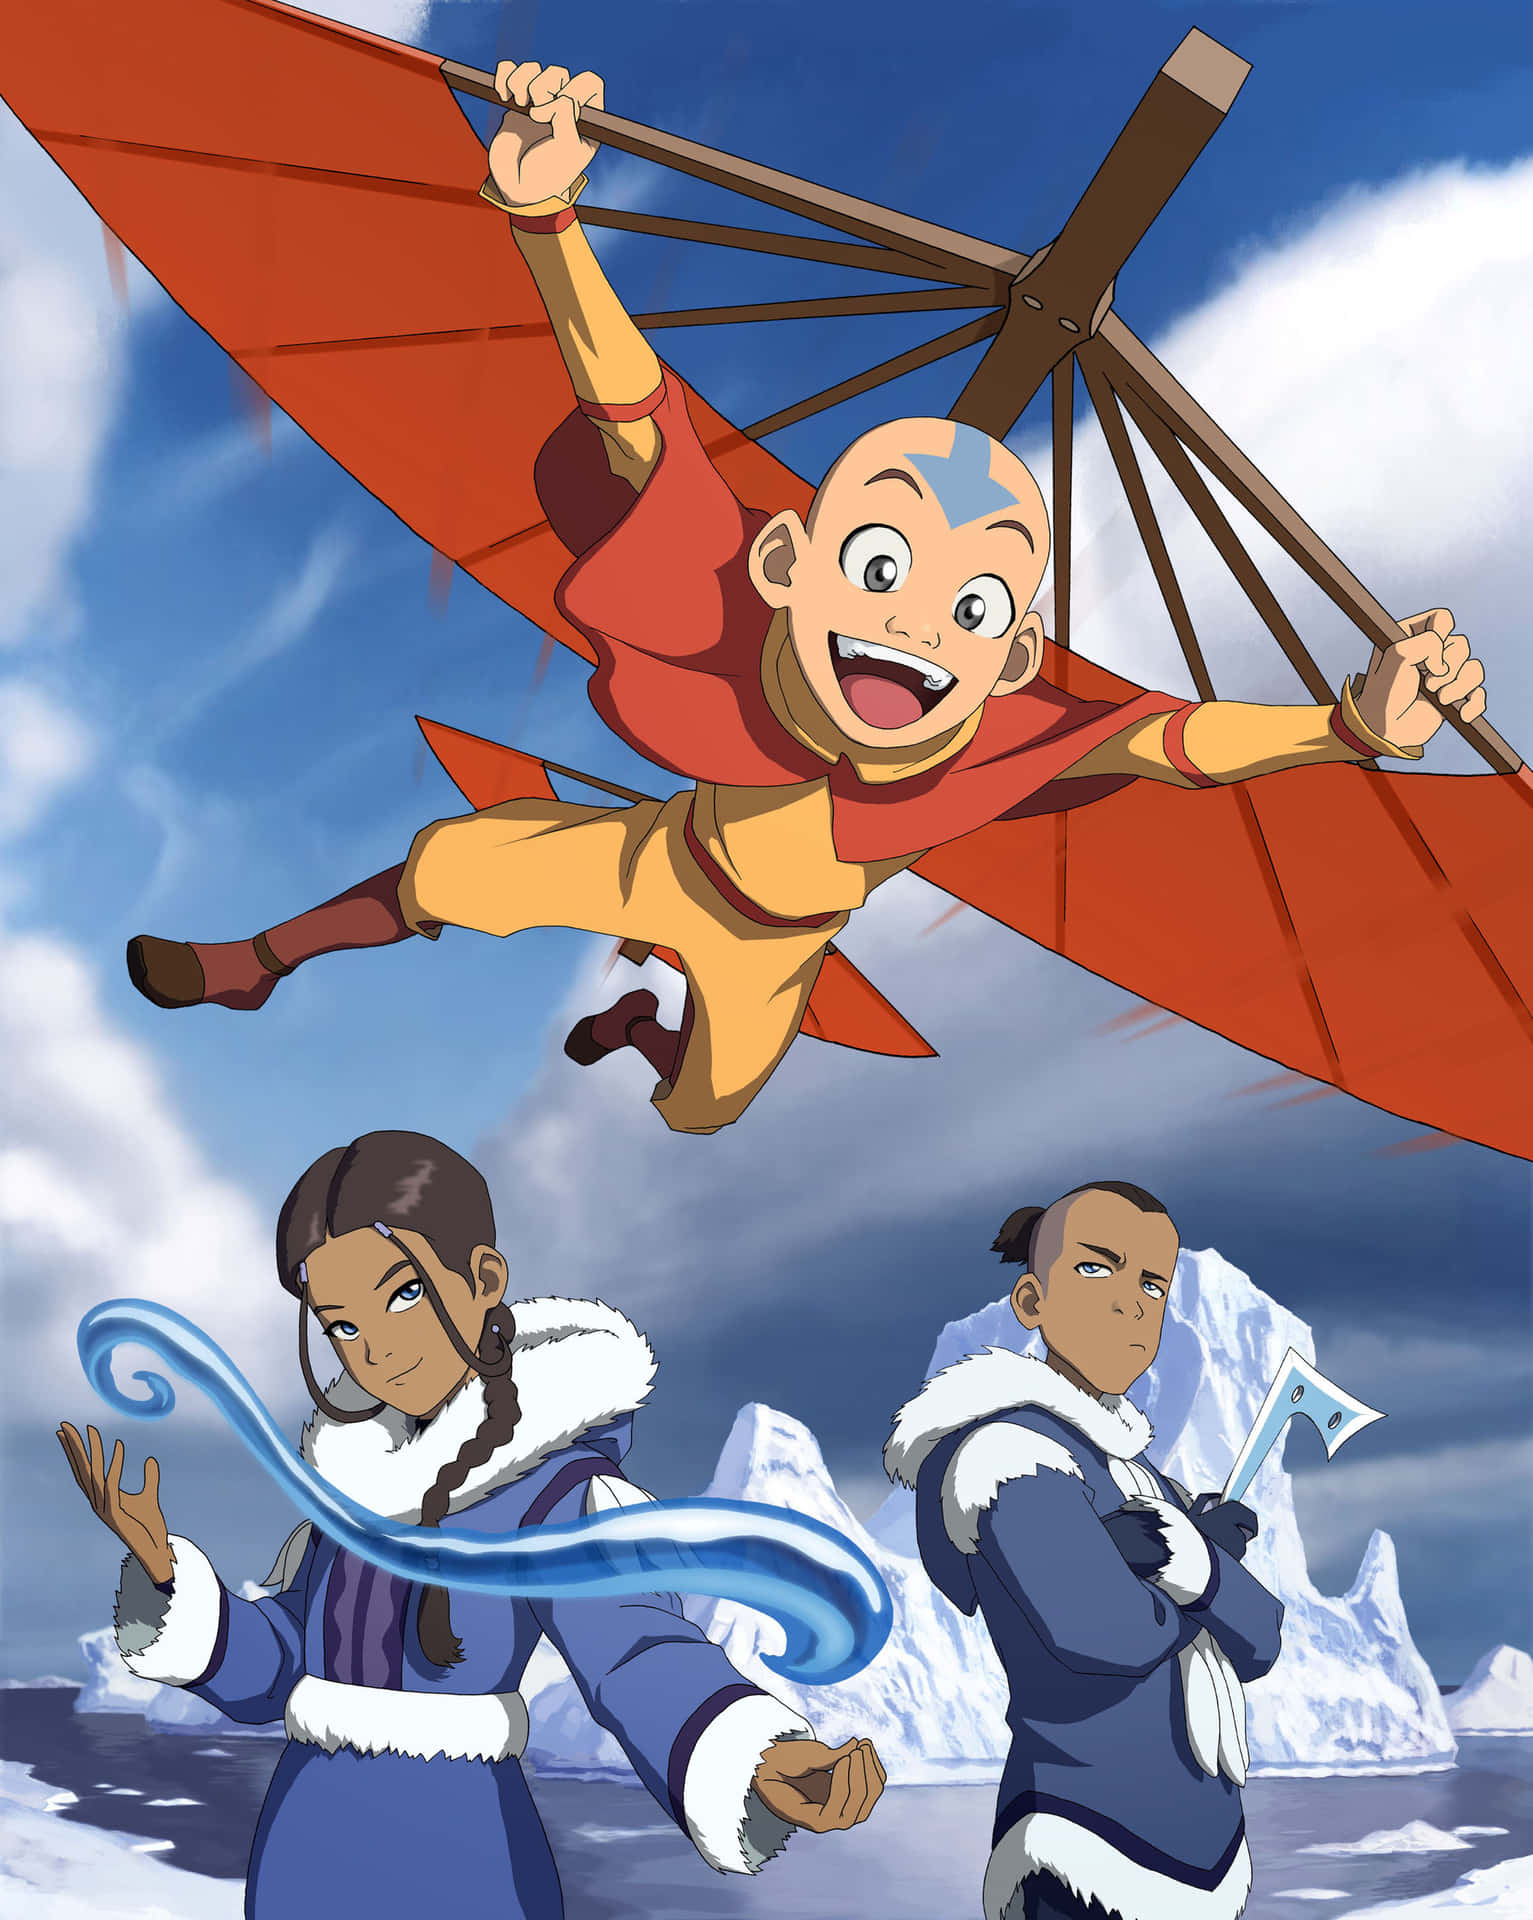 Avatar The Last Airbender - A Poster